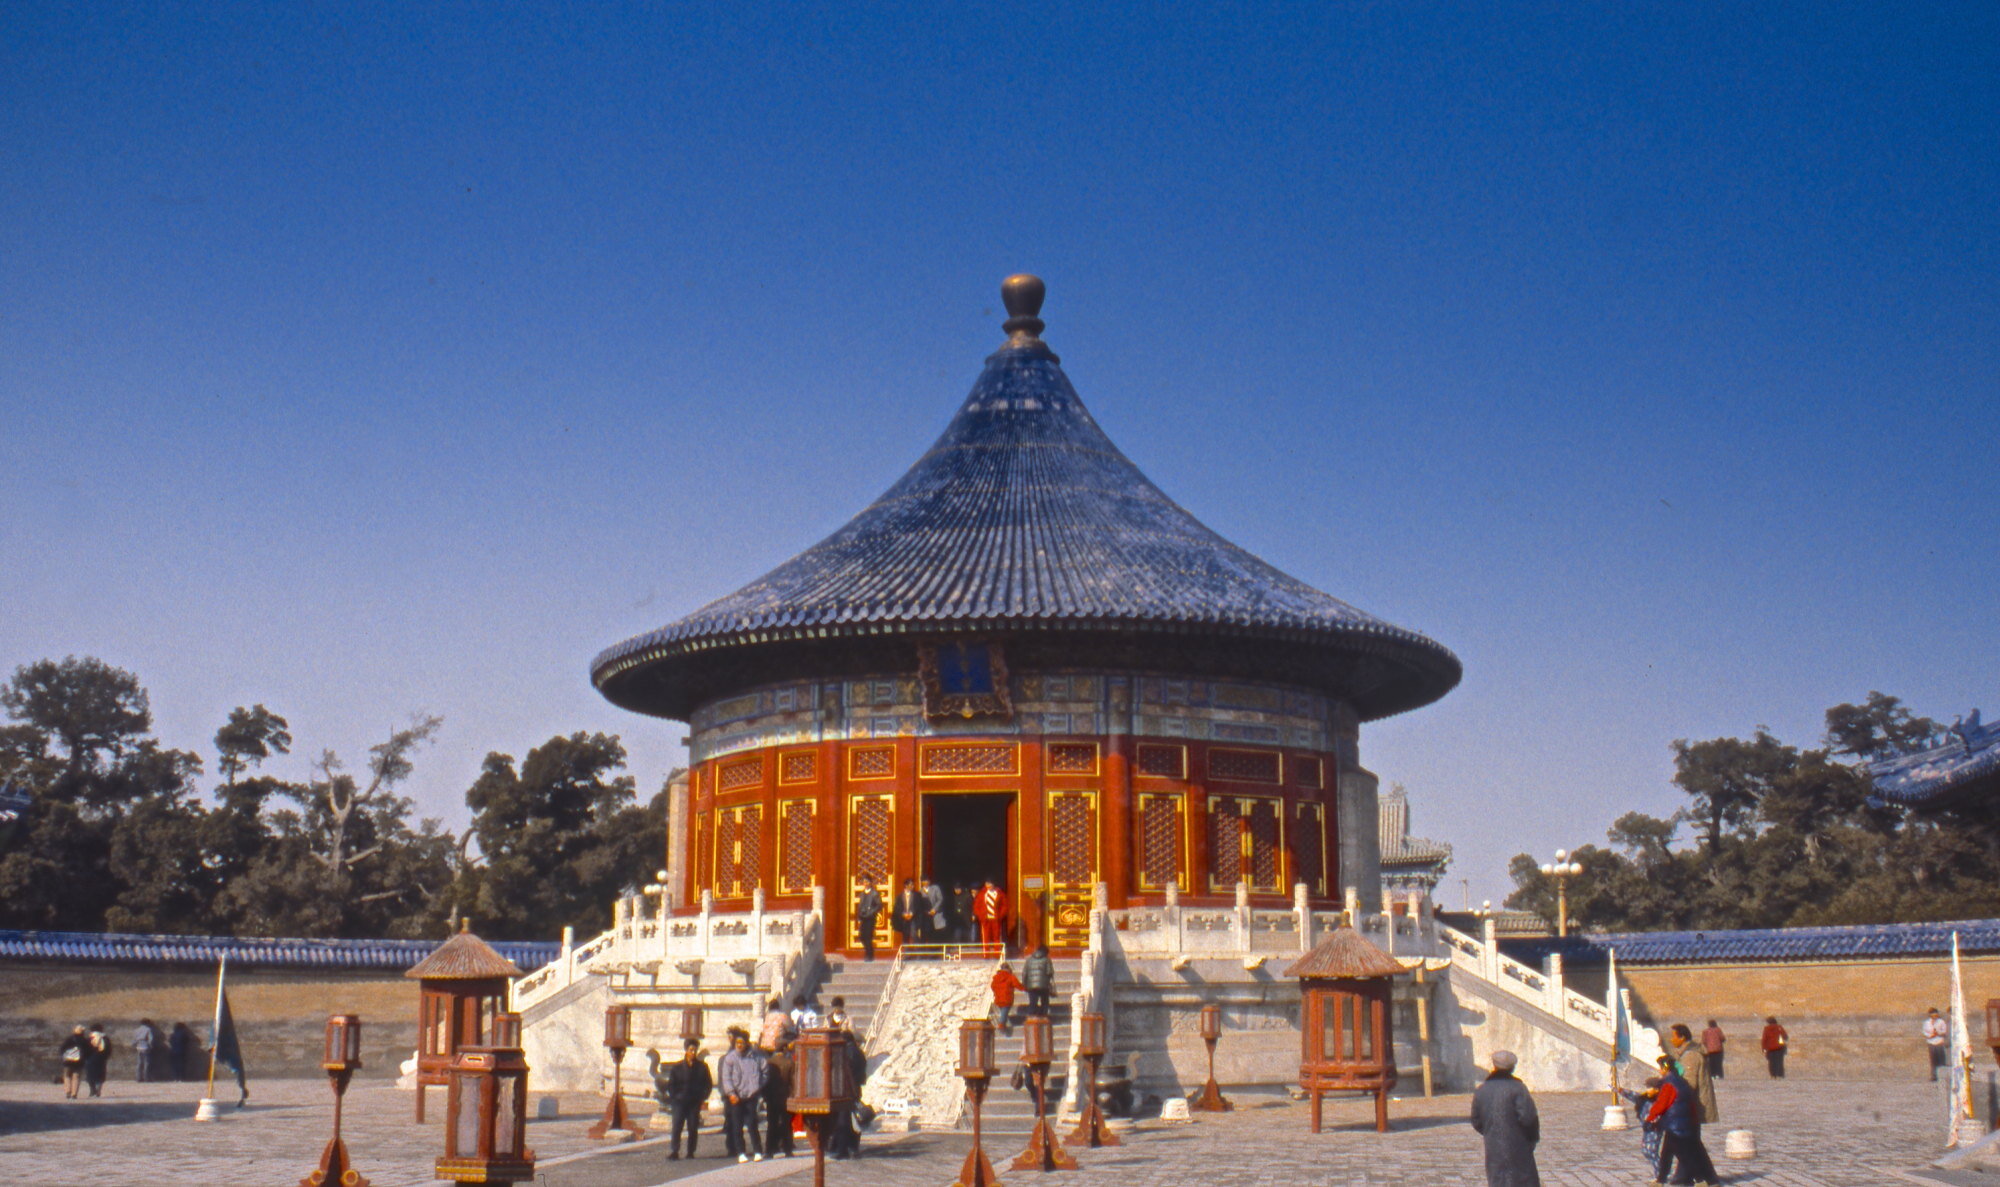 Pavilion in the Imperial Forbidden City. Beijing, China.